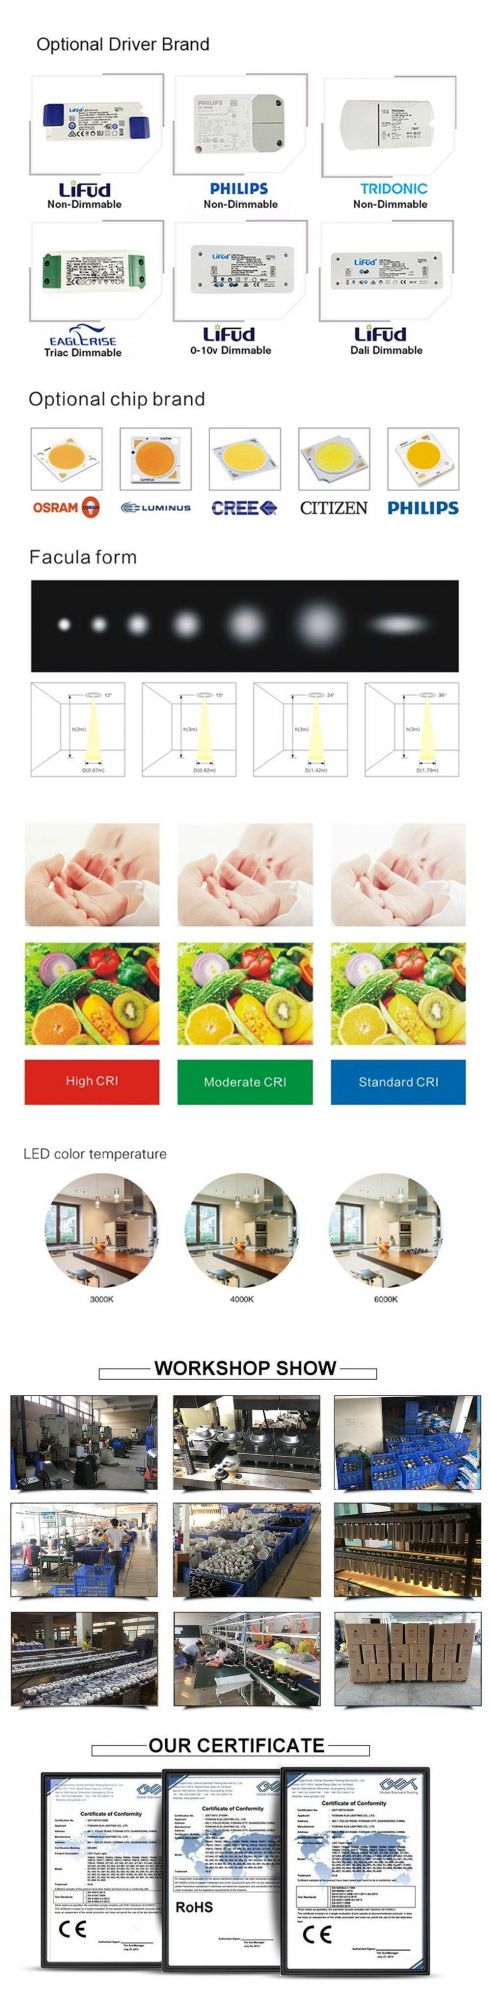 30W, 40W Ce, CCC, RoHS LED COB Down Light Downlight Lamp Ceiling Indoor LED Lighting